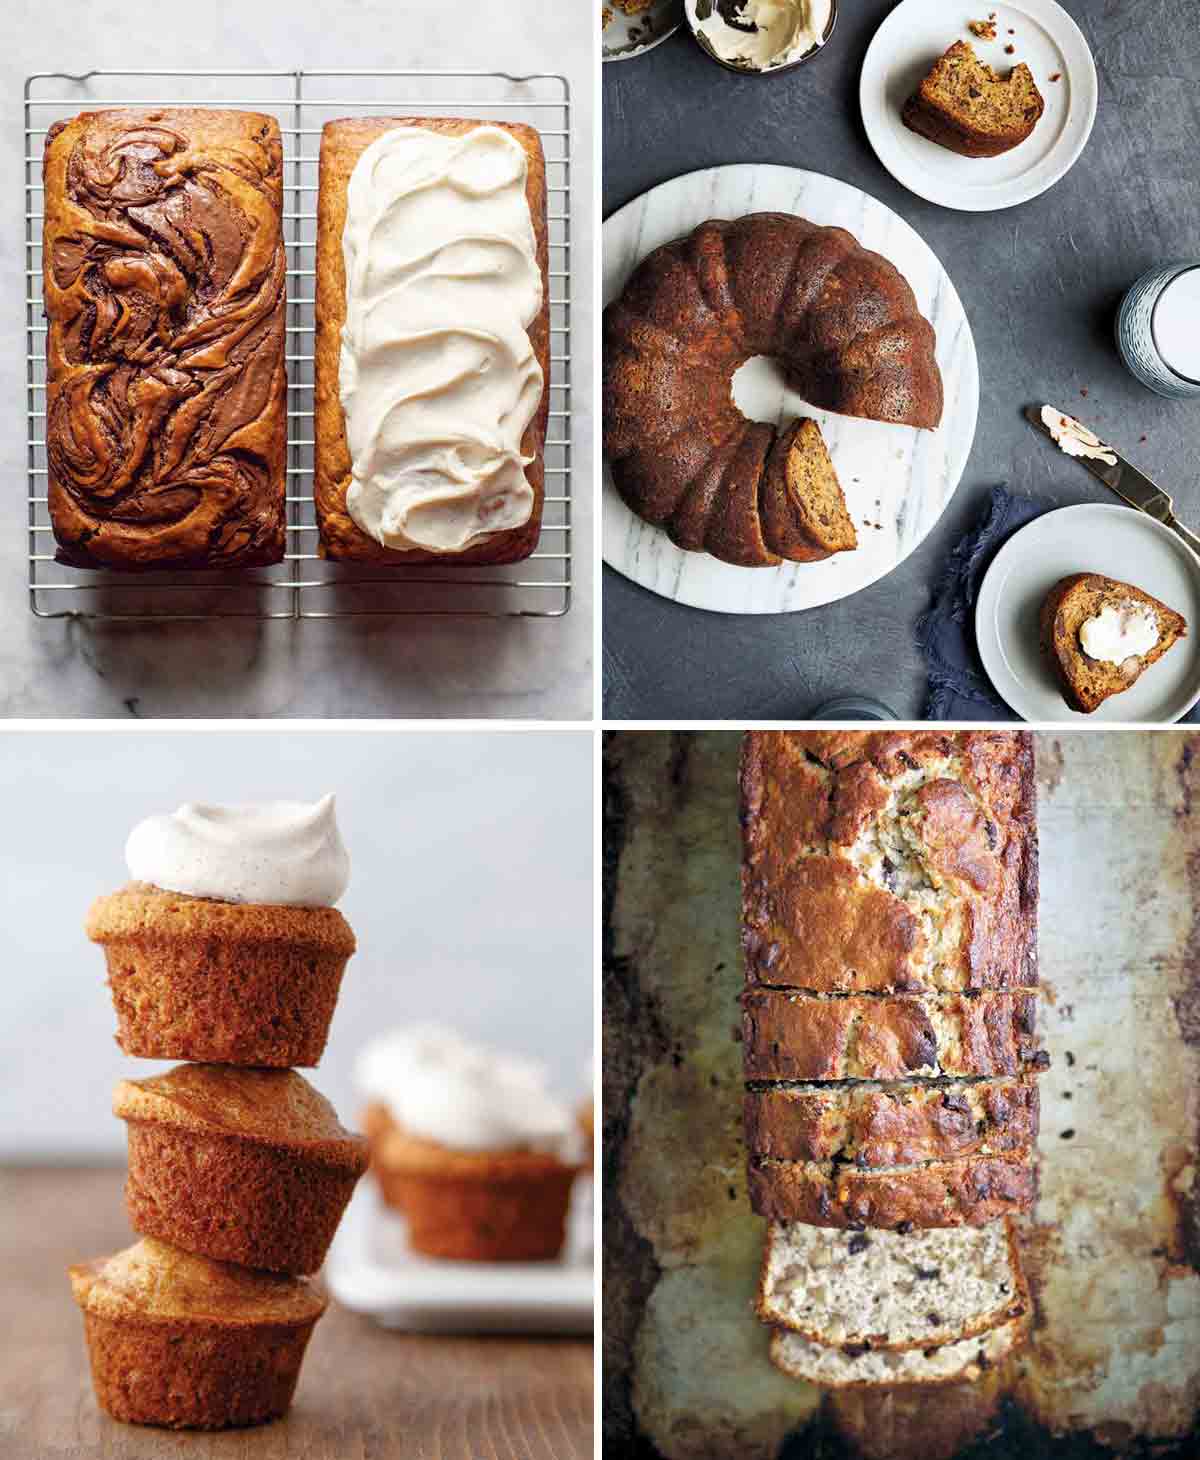 Two loaves of banana bread on a wire rack, a Bundt loaf of banana bread on a white platter, a stack of three mini muffins topped with whipped cream, and a partially sliced loaf of banana bread.